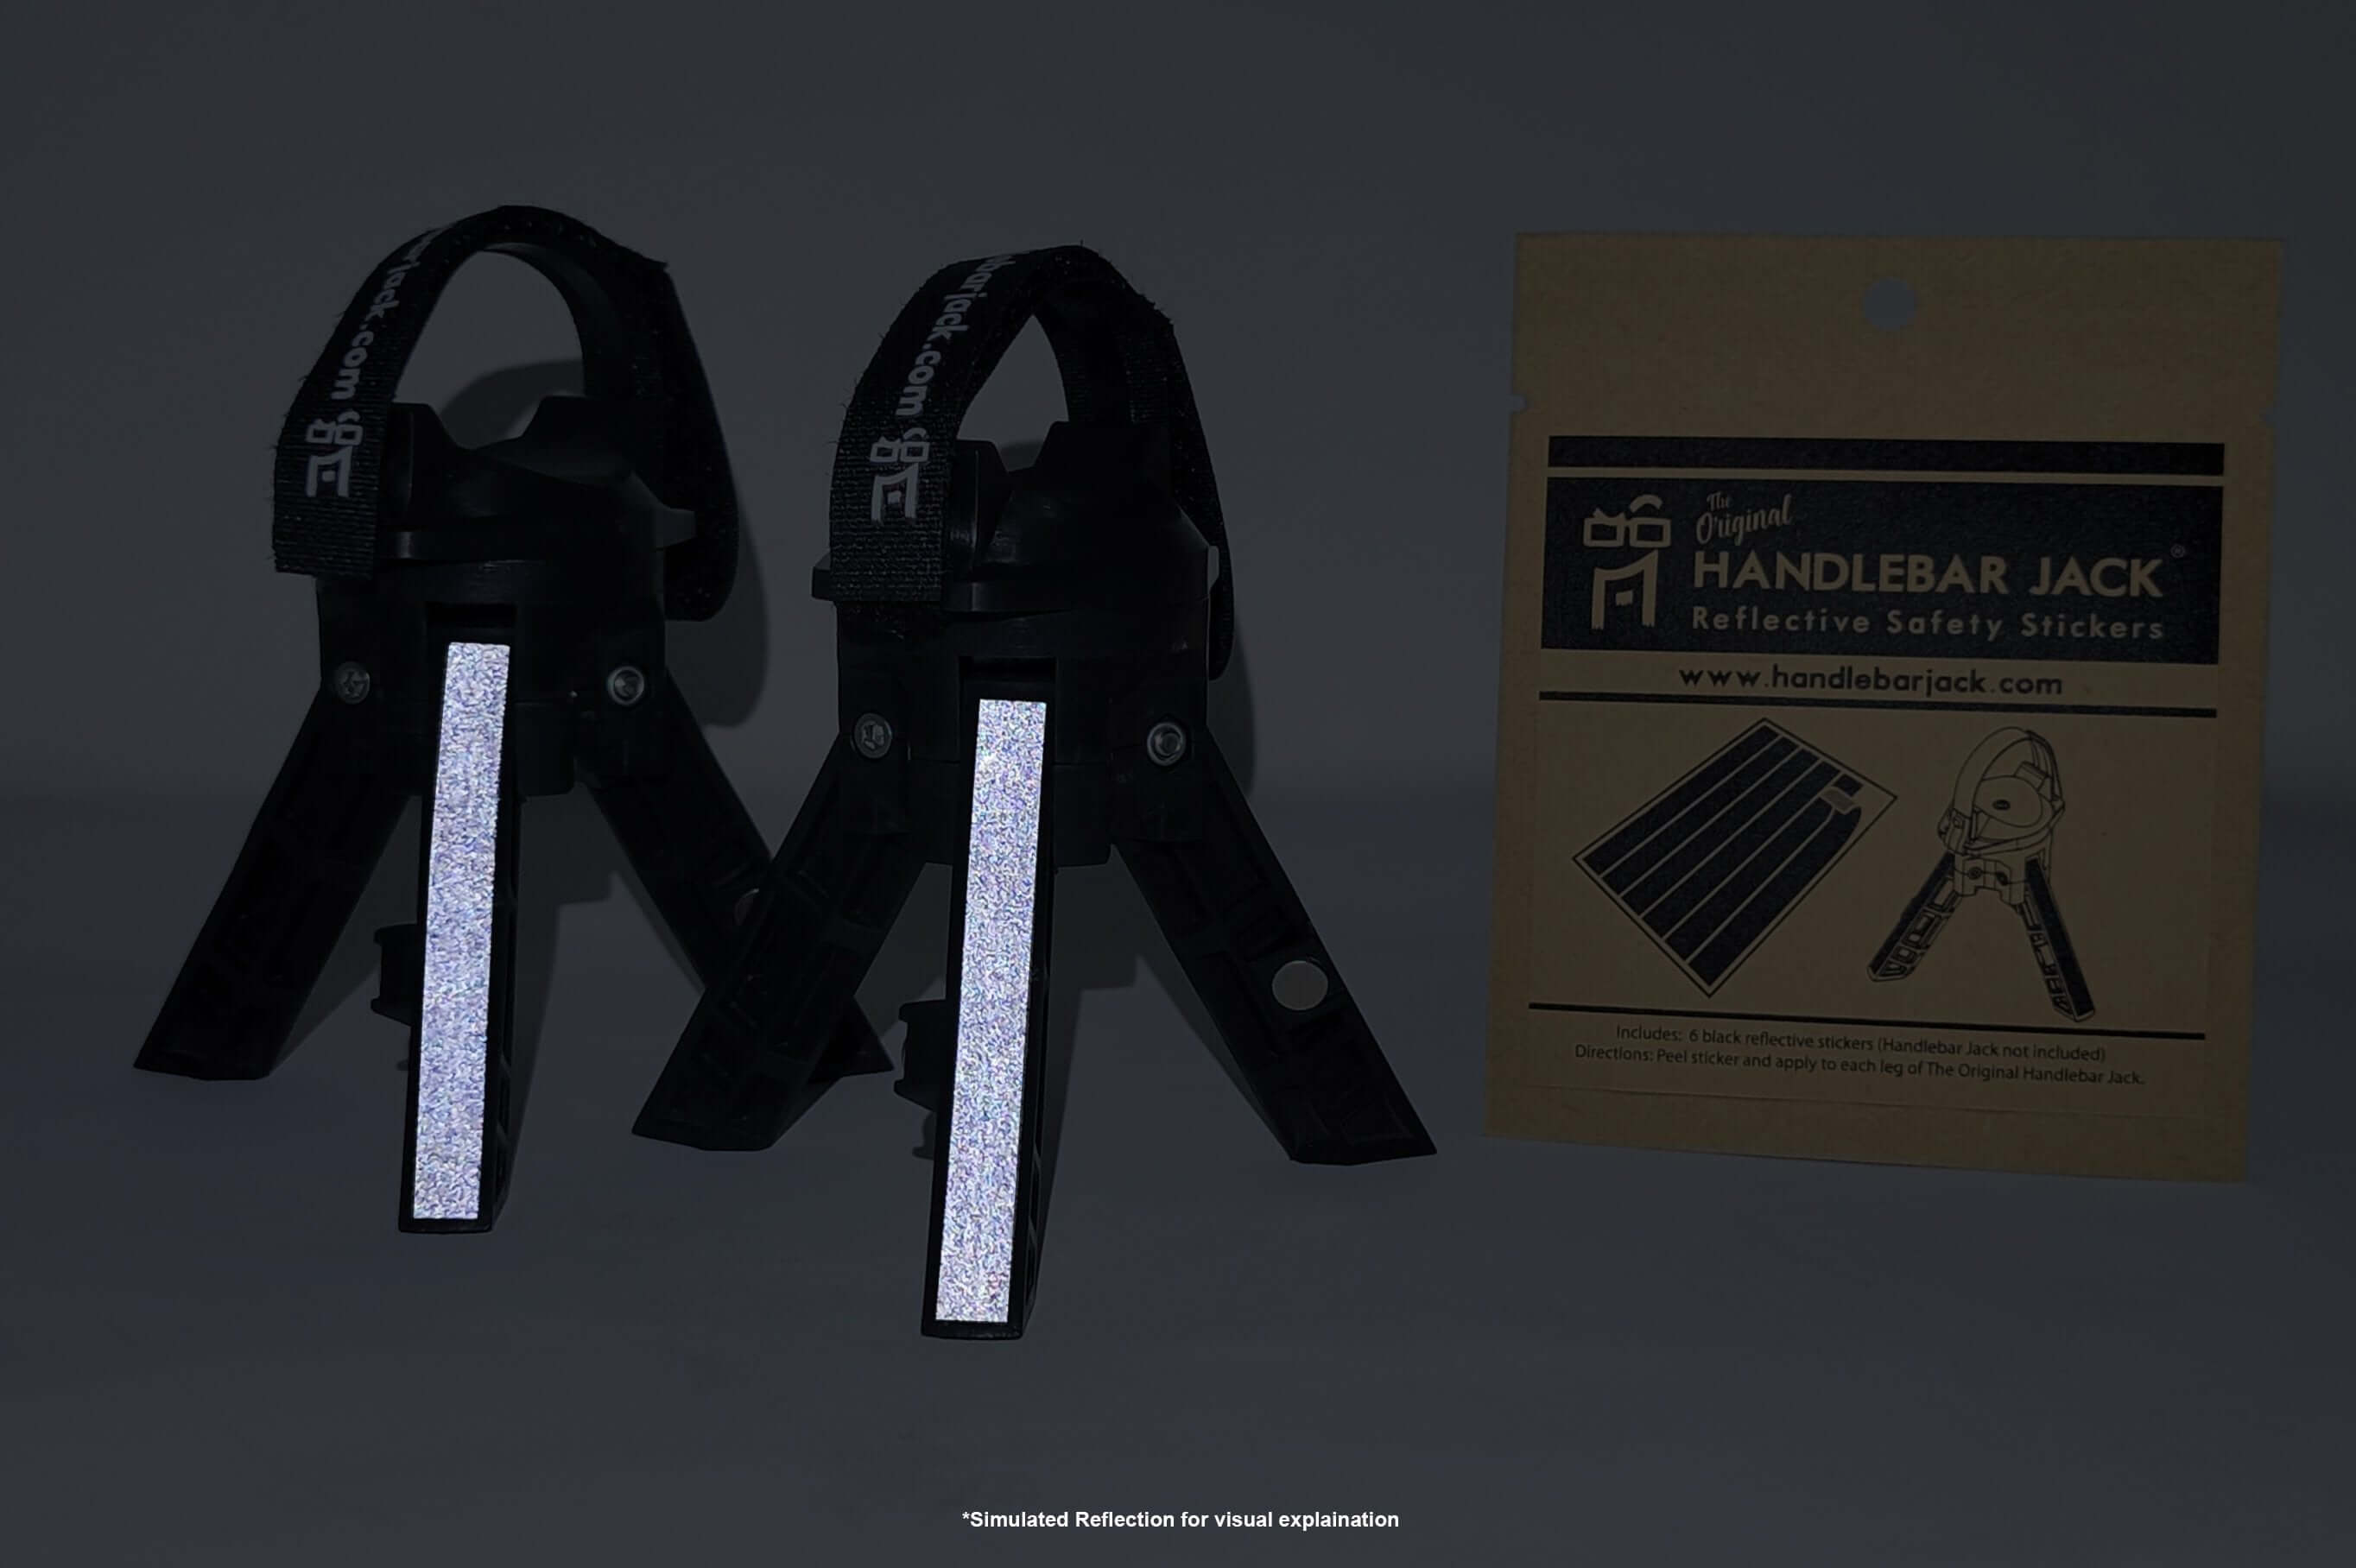 Reflective Safety Stickers for Handlebar Jack